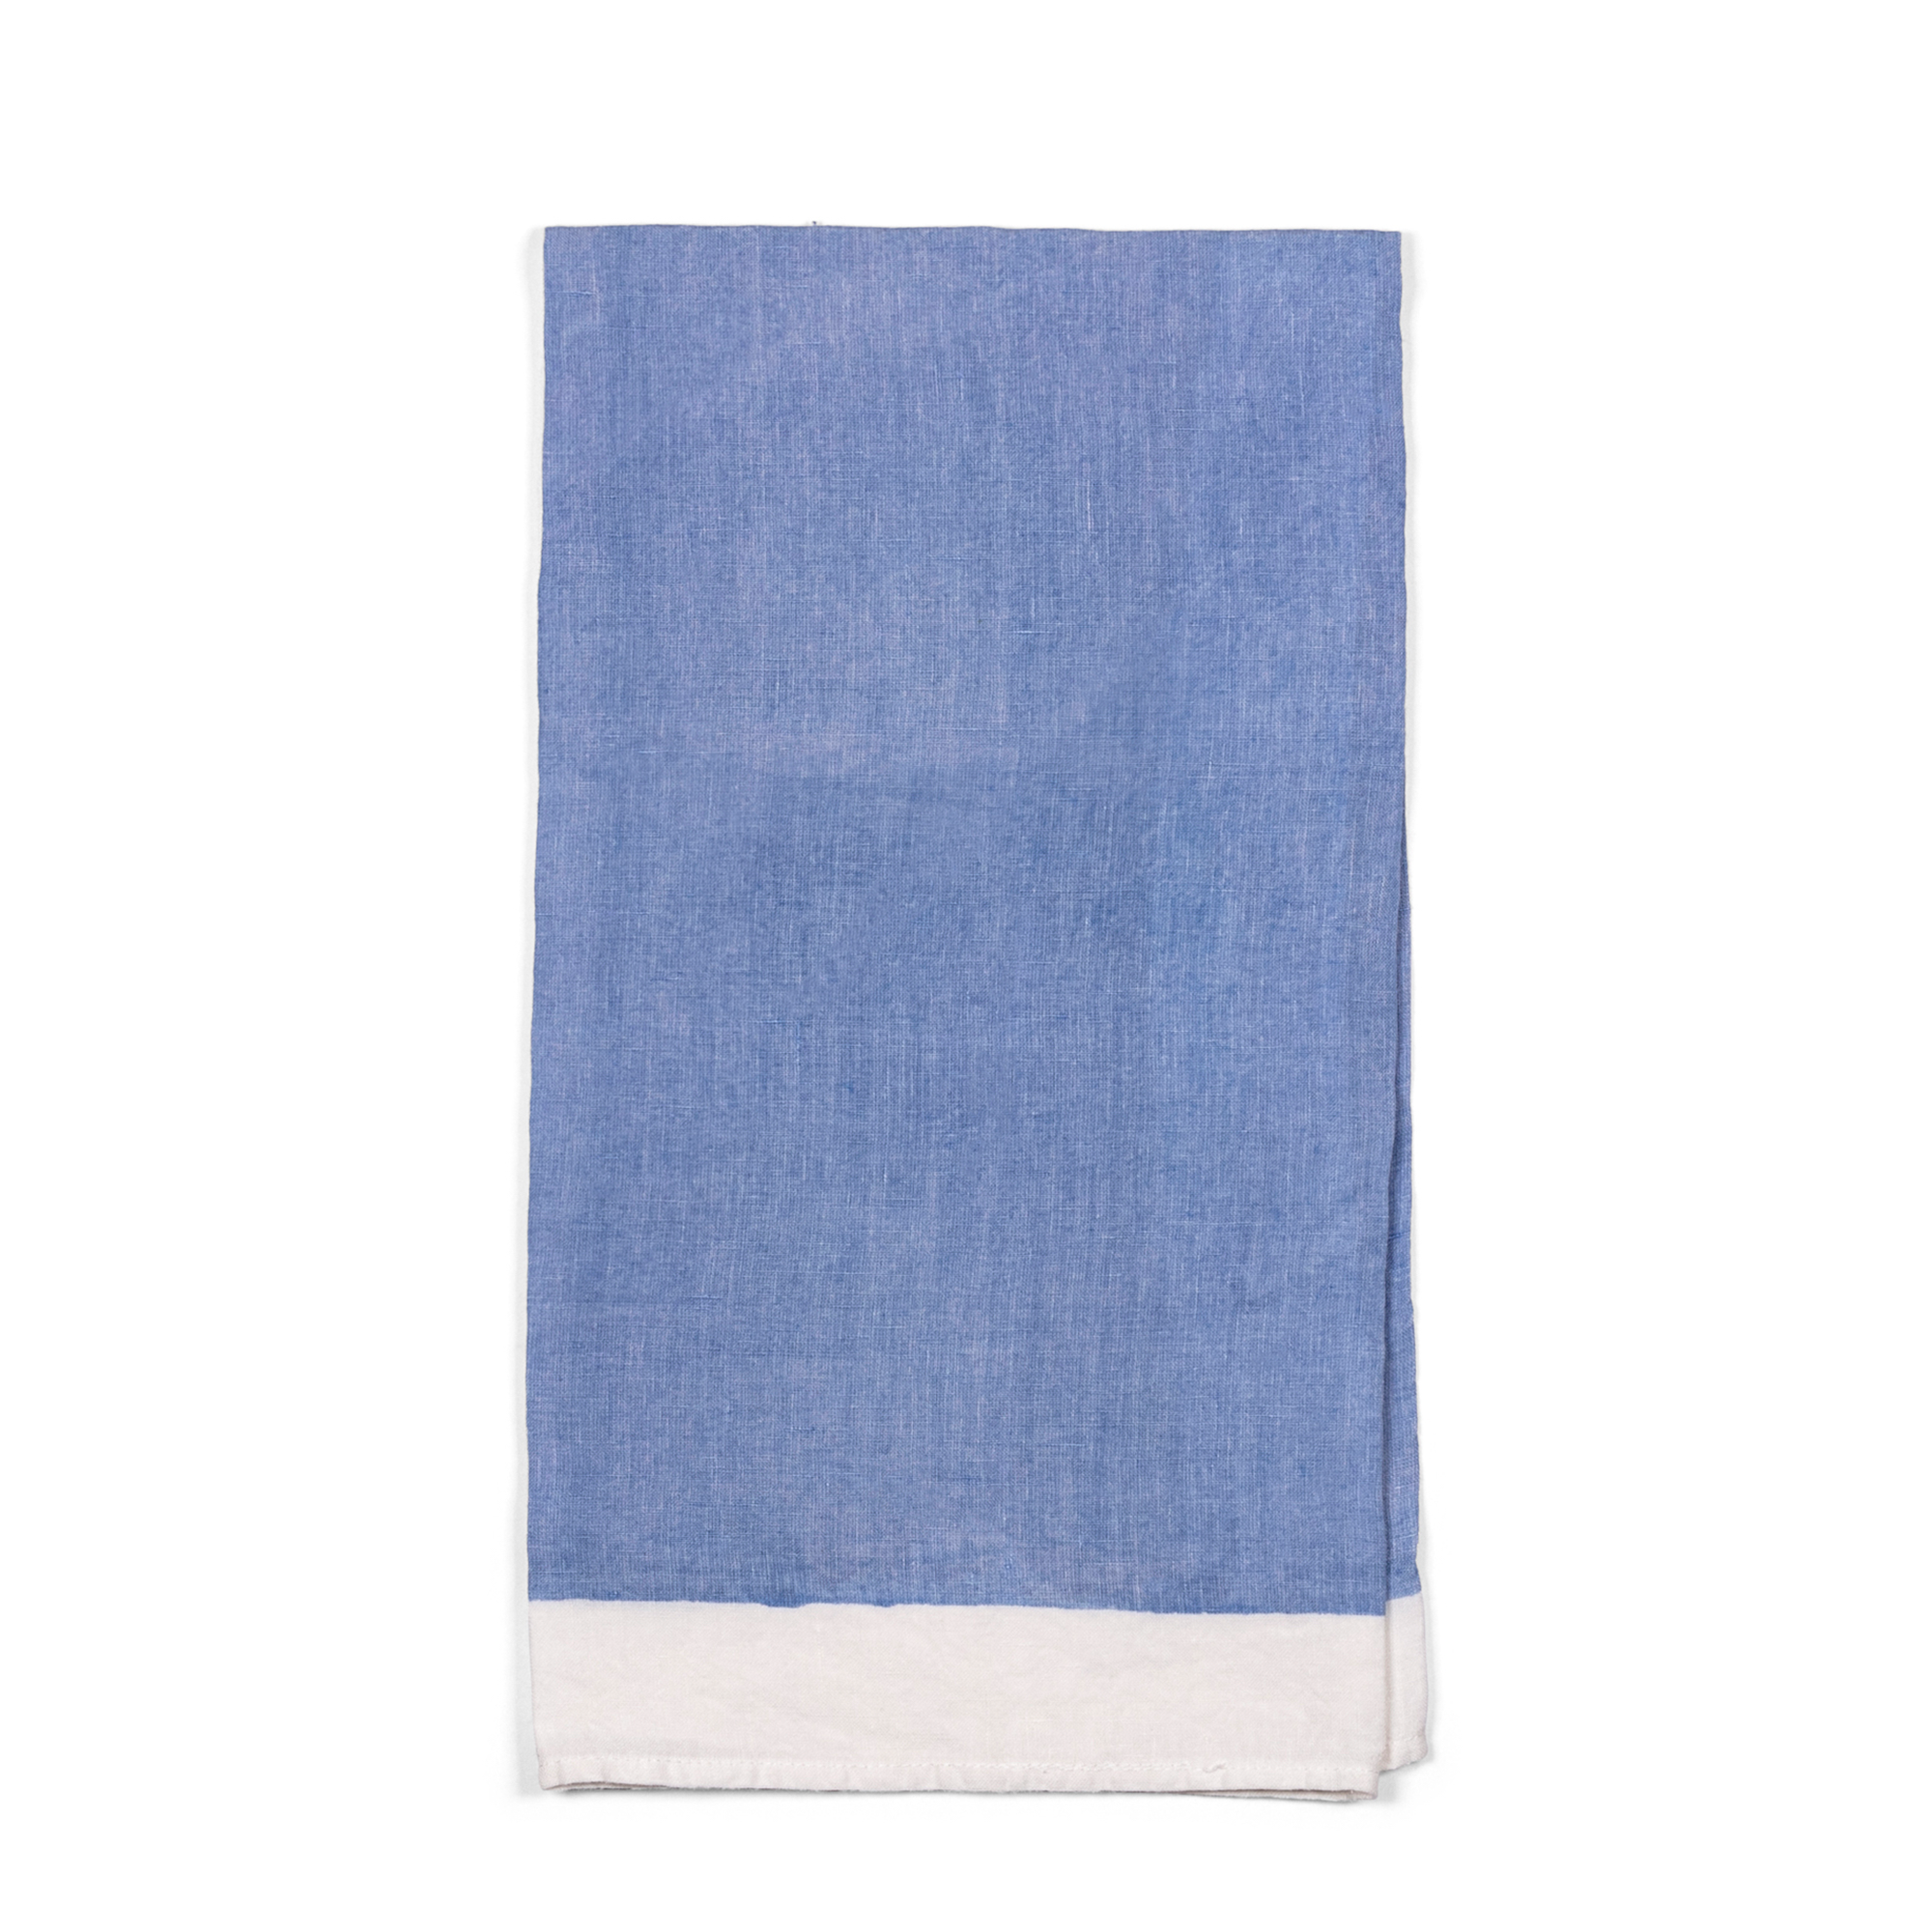 A stylish blue linen tea towel with white borders, handmade using pear wood. Can be used in kitchen, for breakfast, formal dining, or garden tablescape.